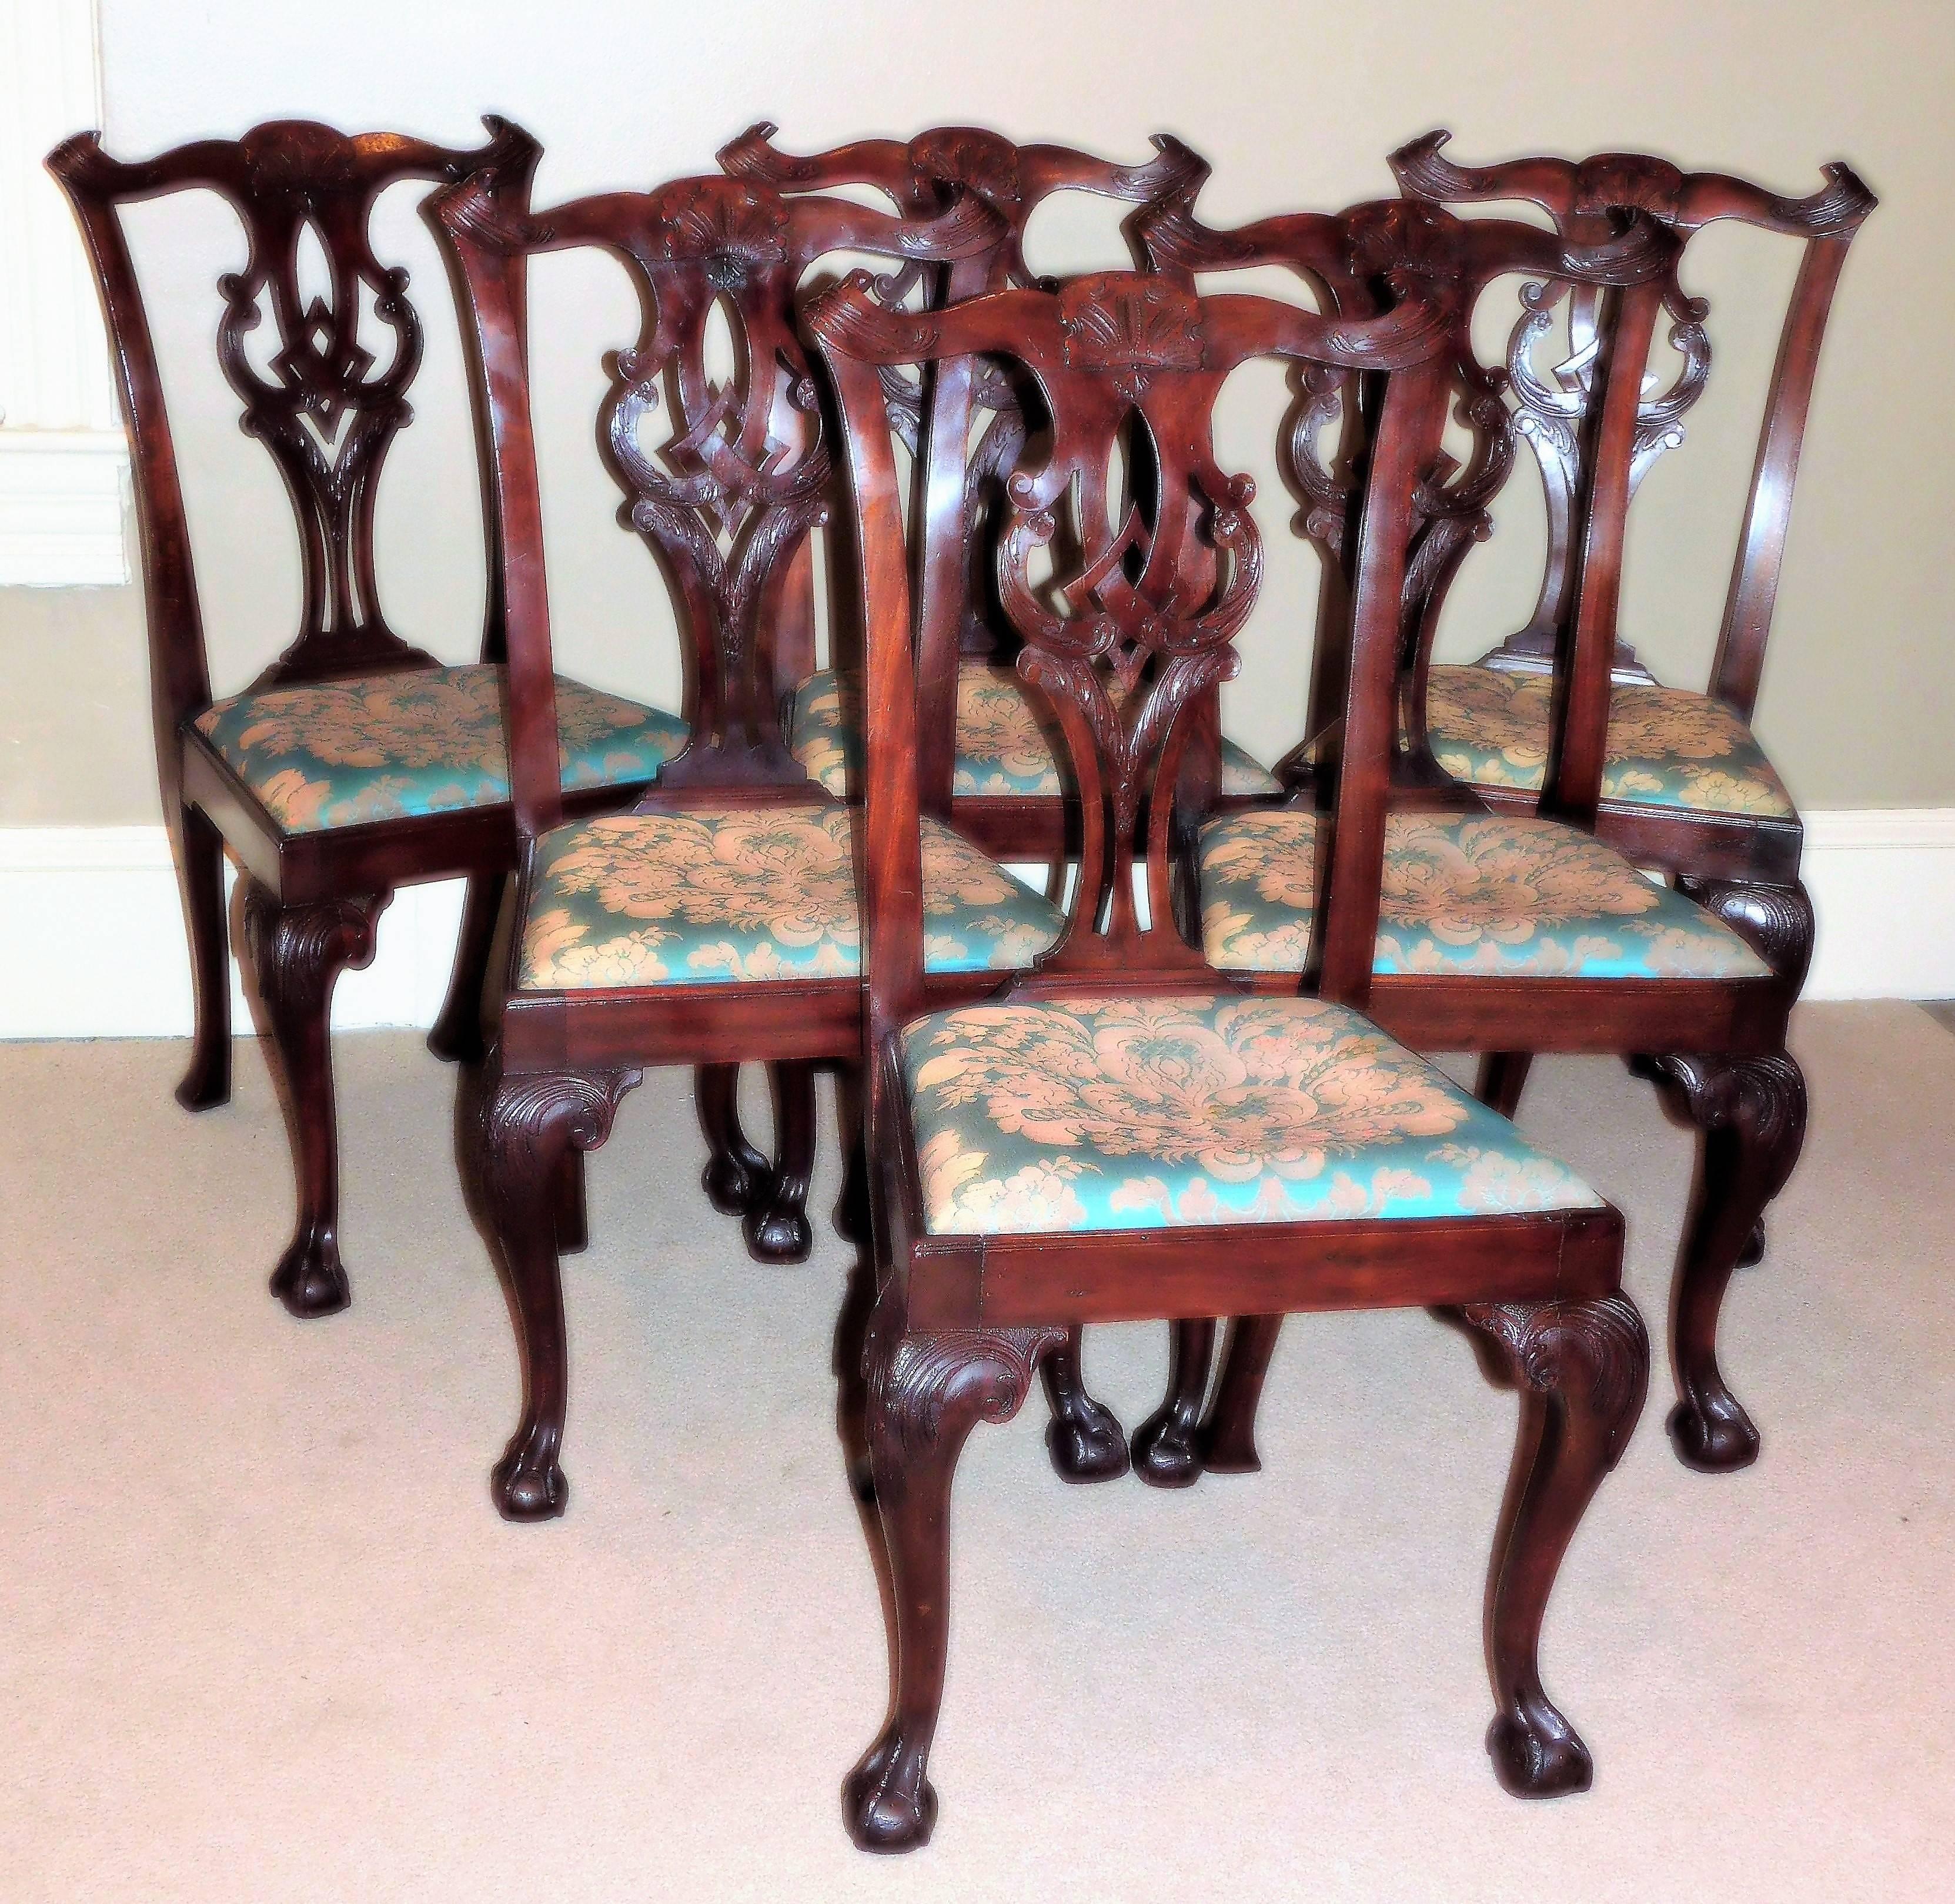 These side chairs are probably American and probably slightly out of period. They are mahogany with pine glue blocks and have excellent carved details. Unusual petite size - original seat frames - restored French polish.